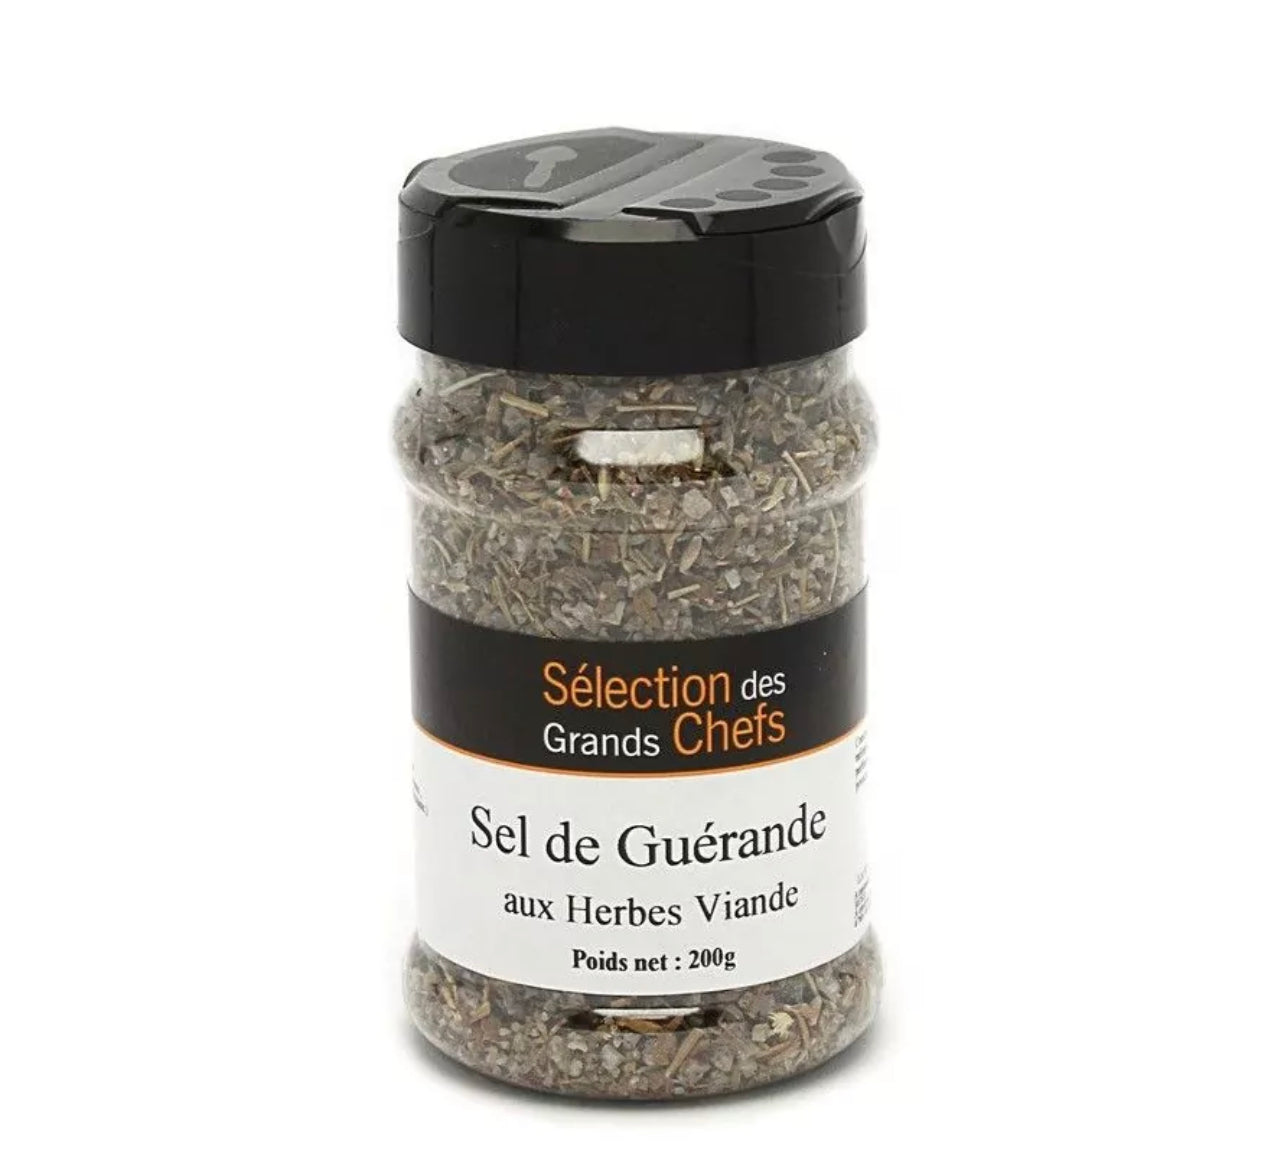 Guérande salt with herbs for meat - 200g